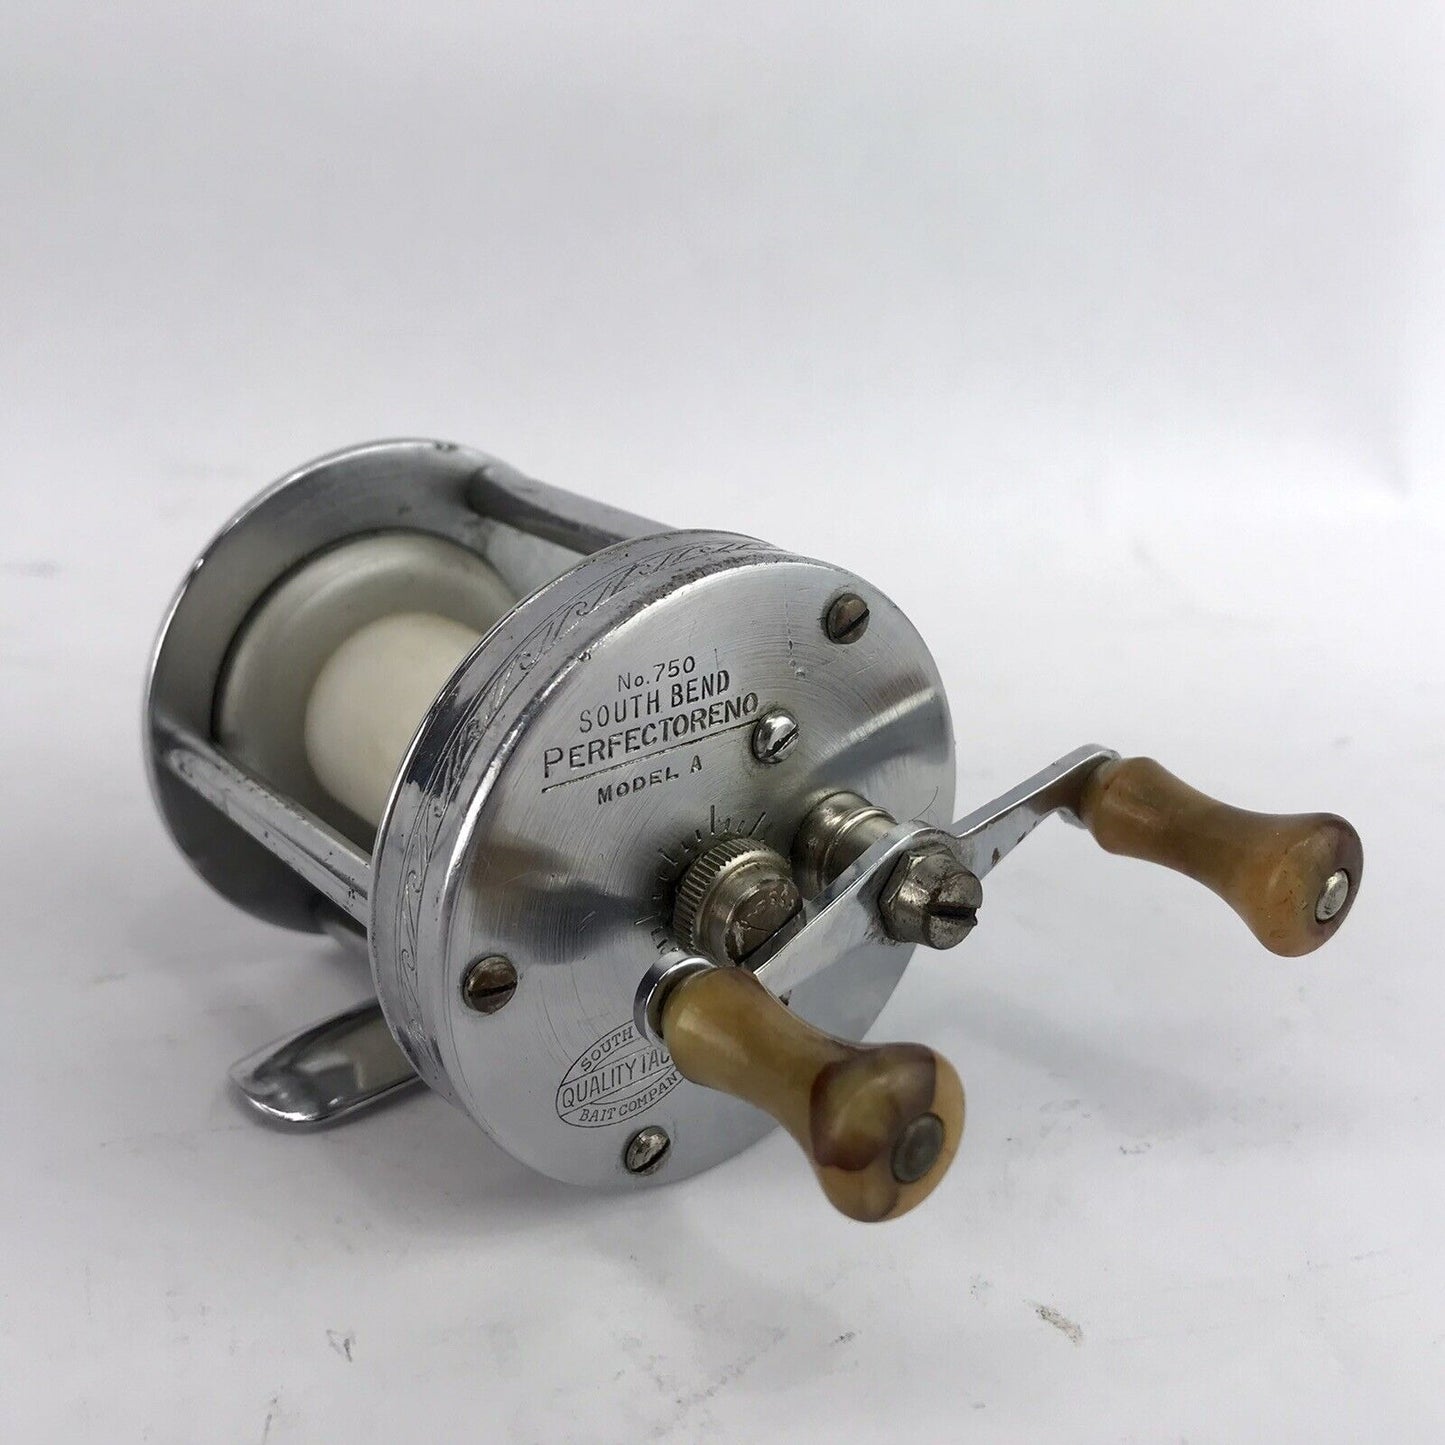 South Bend Perfectoreno Model A Fishing Reel WORKS GREAT!